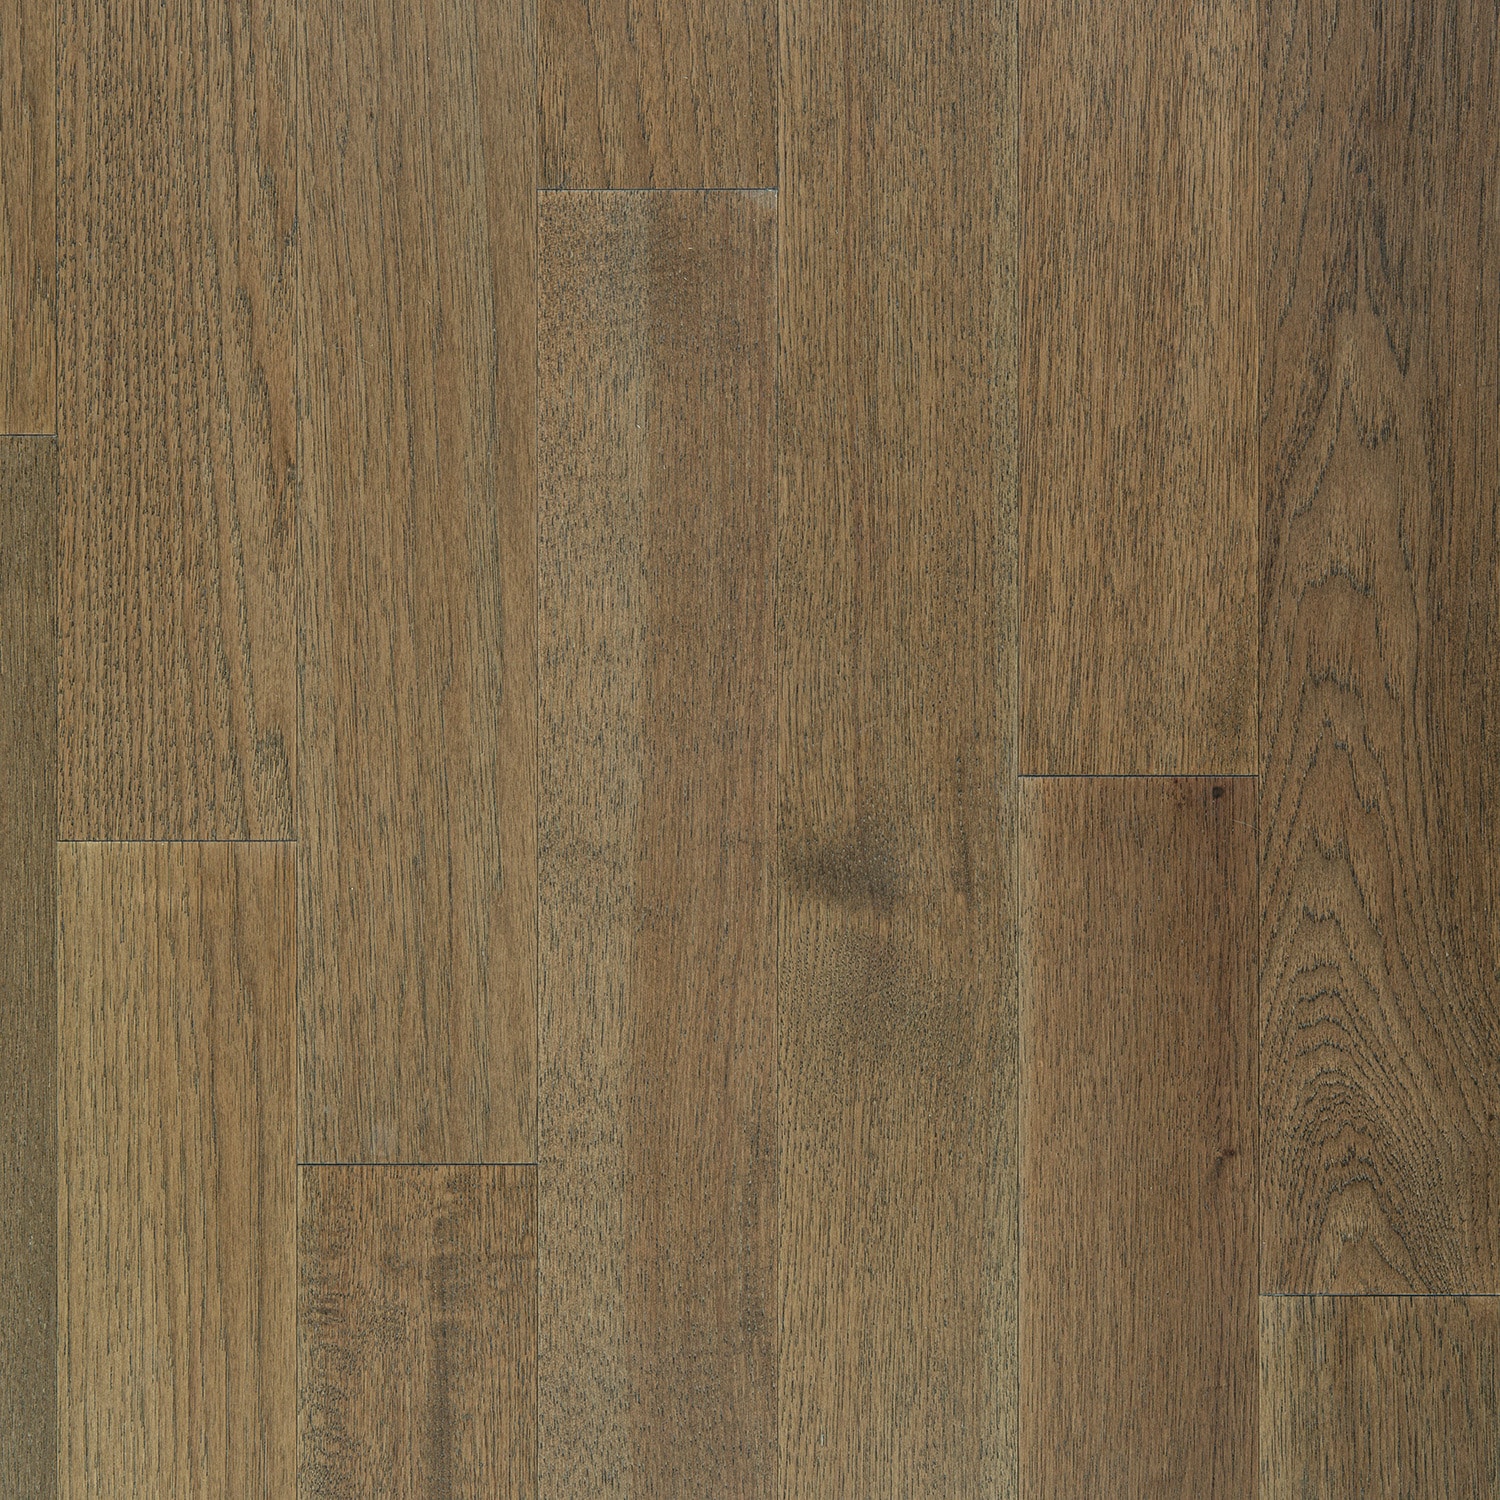 (Sample) allen+roth Saddle Hickory Engineered Hardwood Flooring in Brown | - allen + roth 19LY036-1